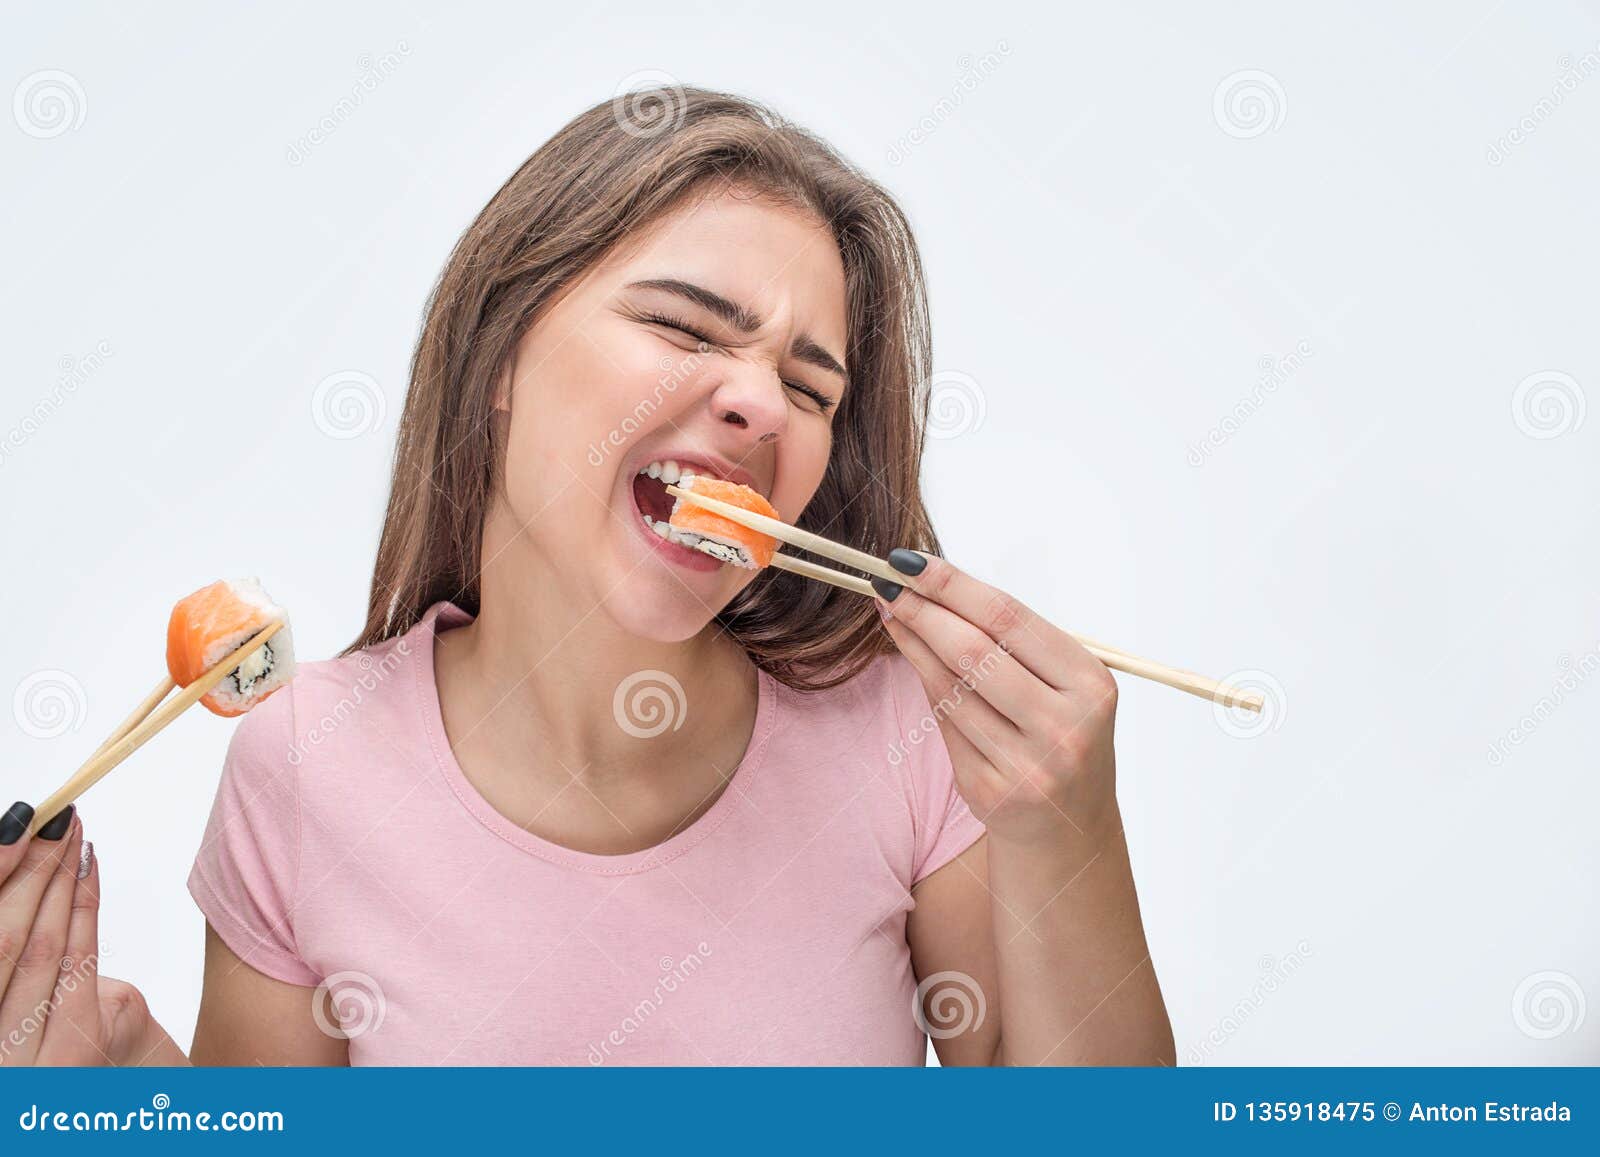 young woman devour pieces of sushi. she bite piece. model hold them with chopsticks.  on grey background.